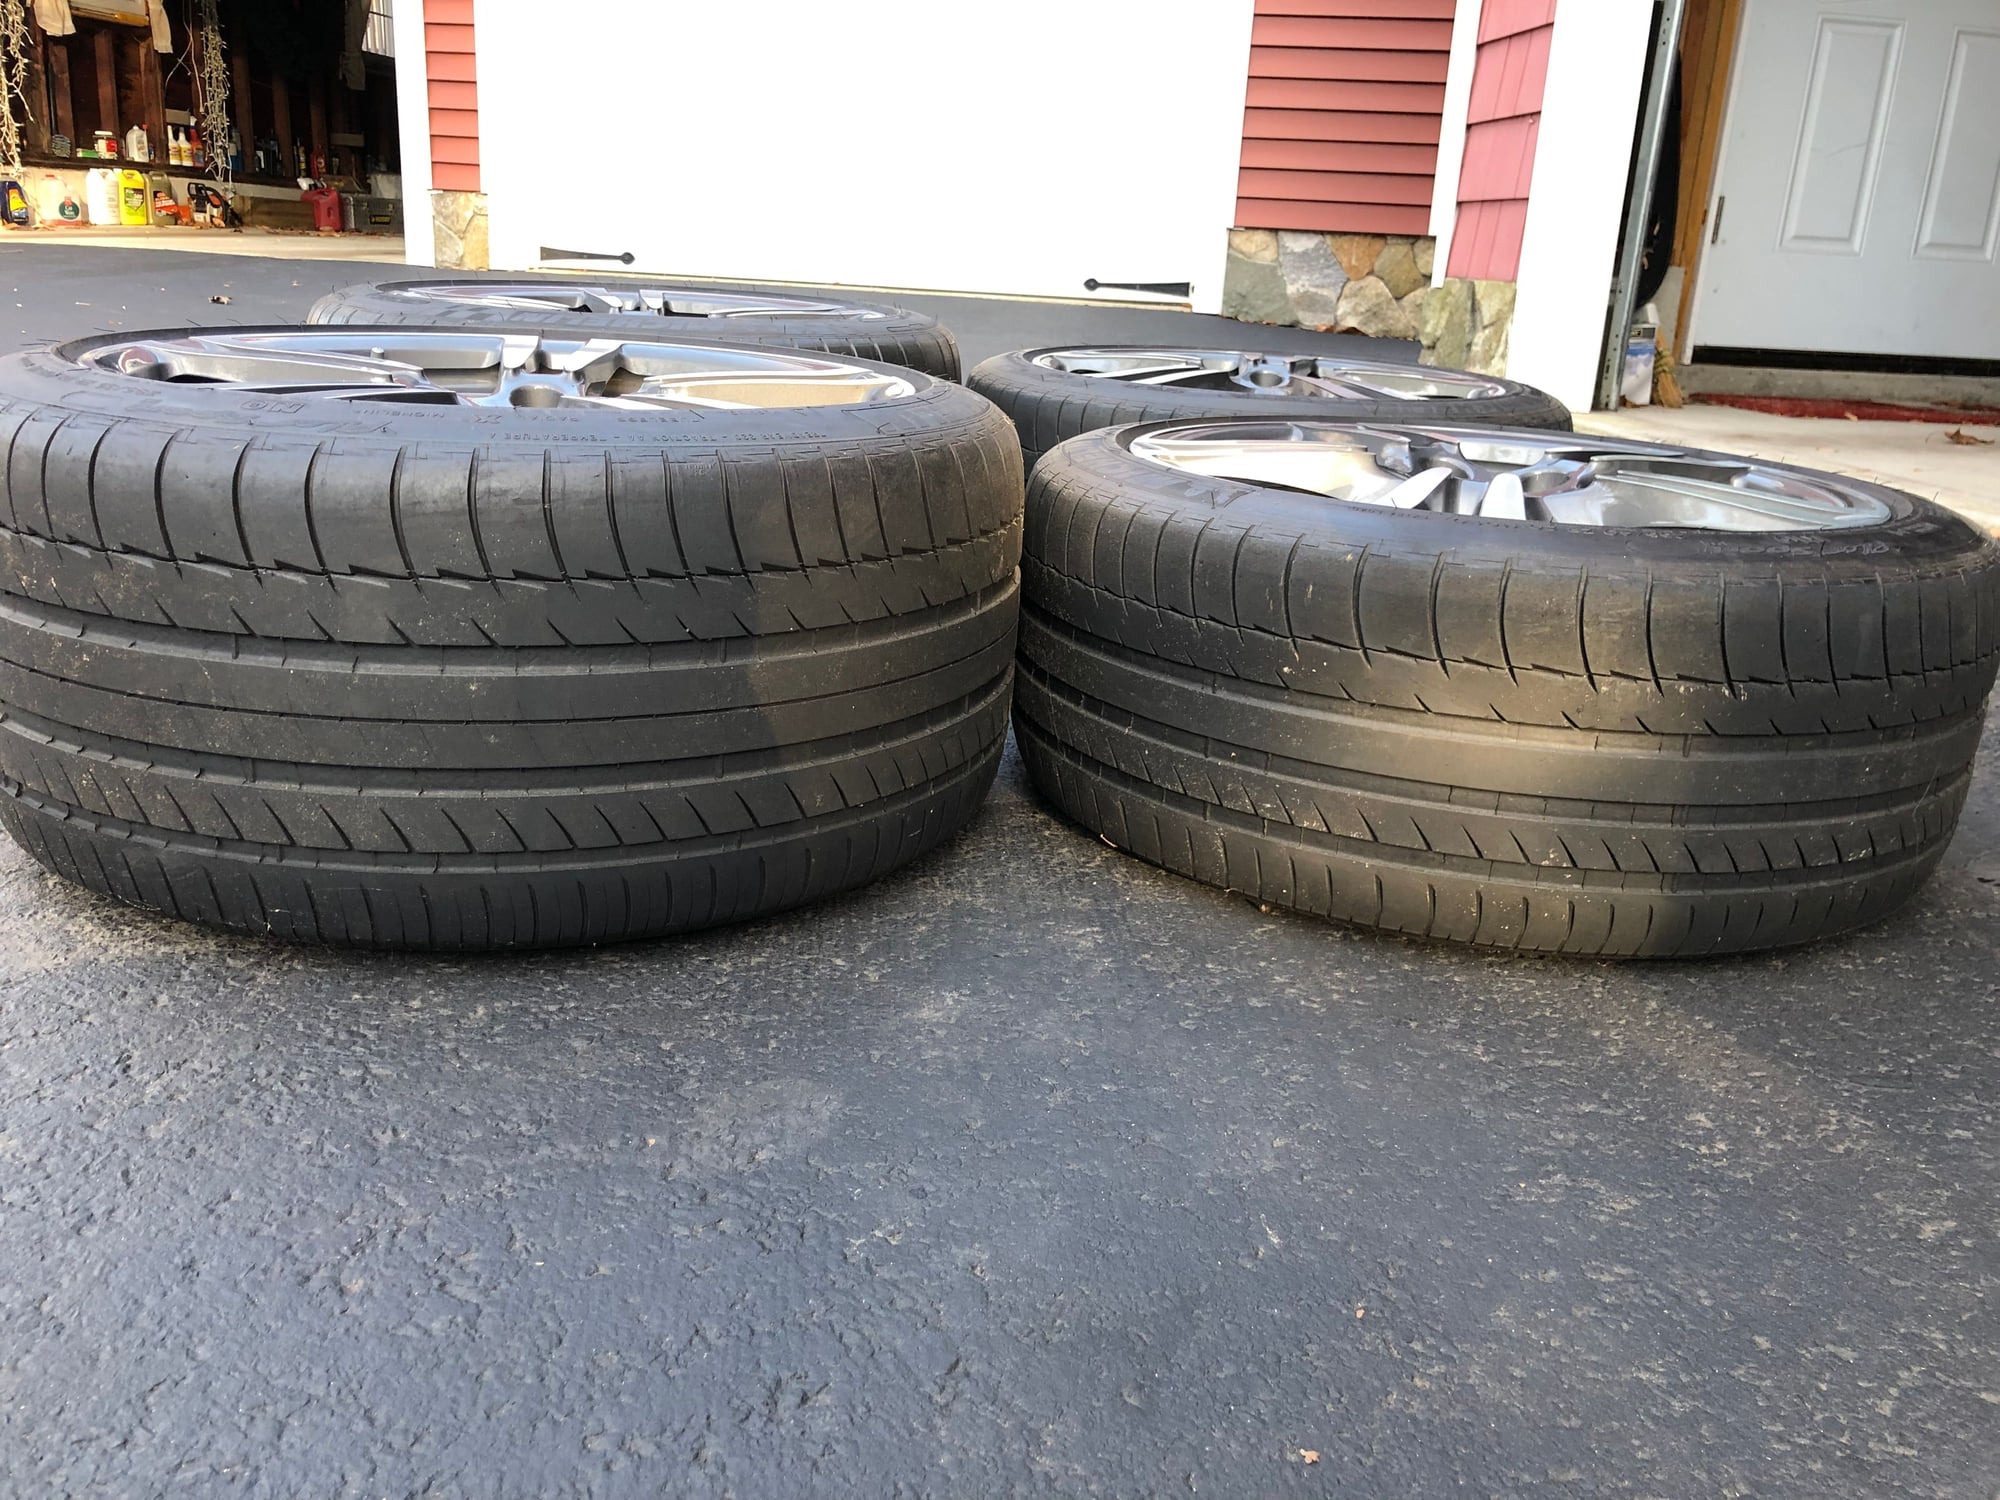 Wheels and Tires/Axles - Cayenne/Panamera Porsche Turbo II Wheels, Tires, TPMS - Used - 2010 to 2019 Porsche All Models - Stratford, CT 06614, United States